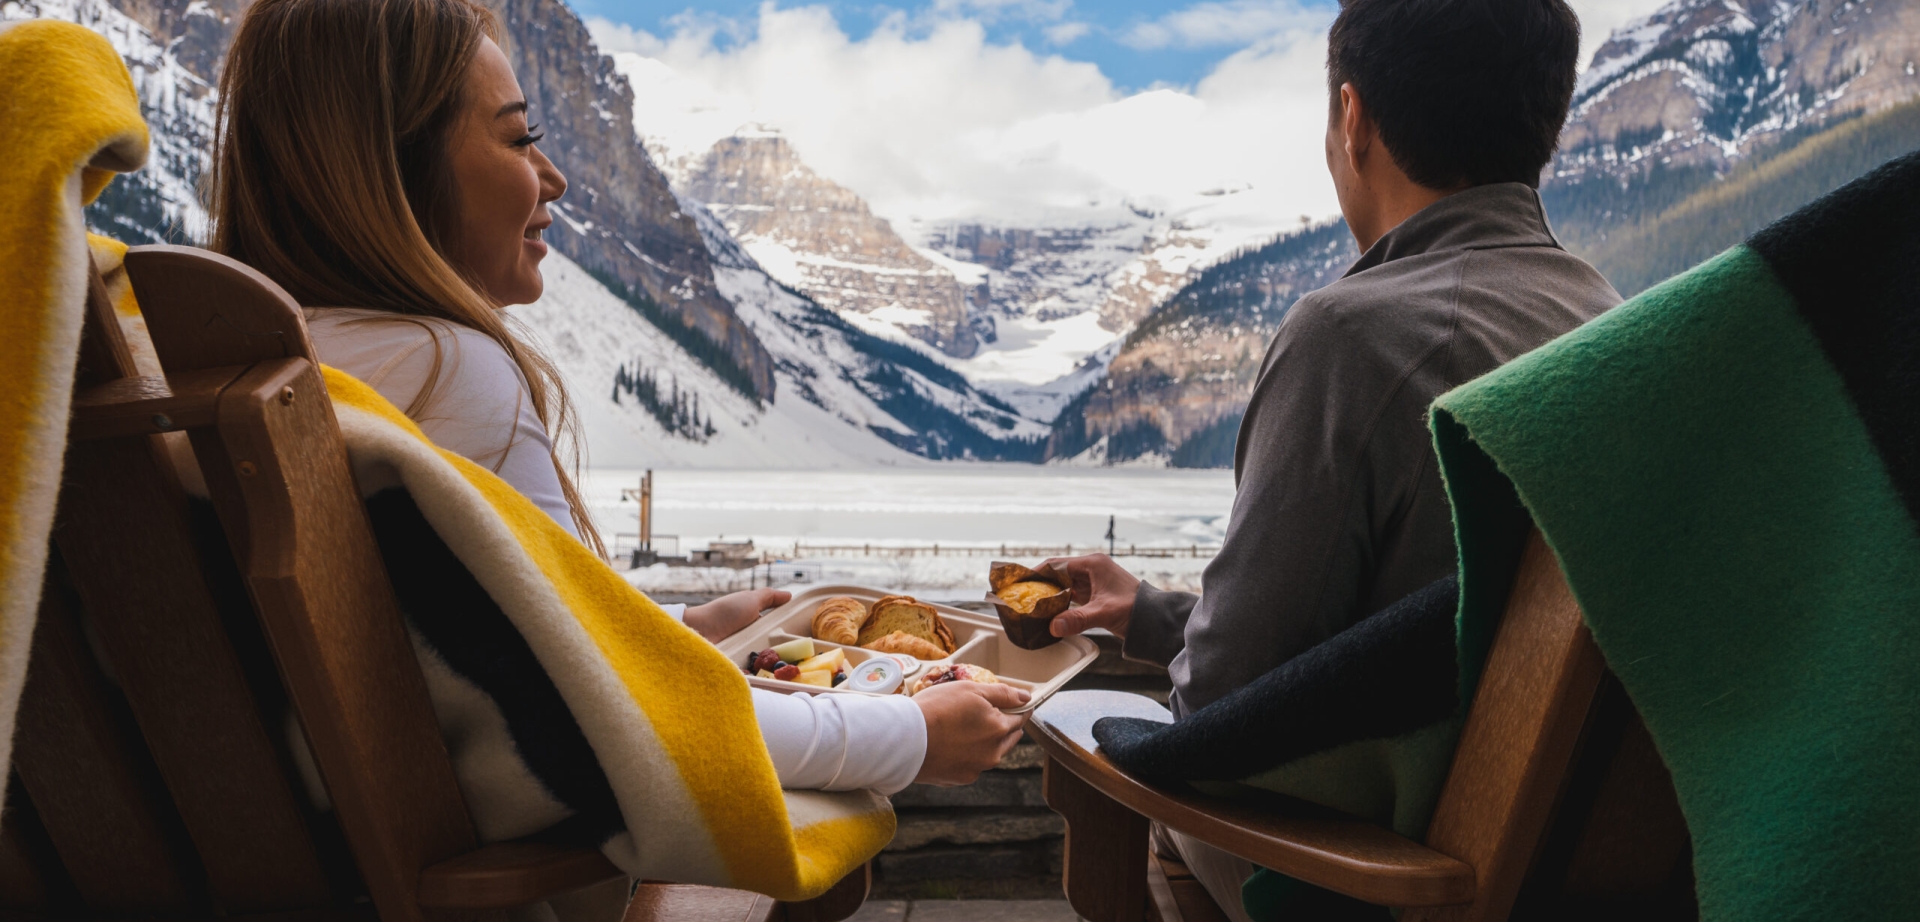 35 BEST Things to do in Lake Louise, Alberta (2023 Complete Guide!)